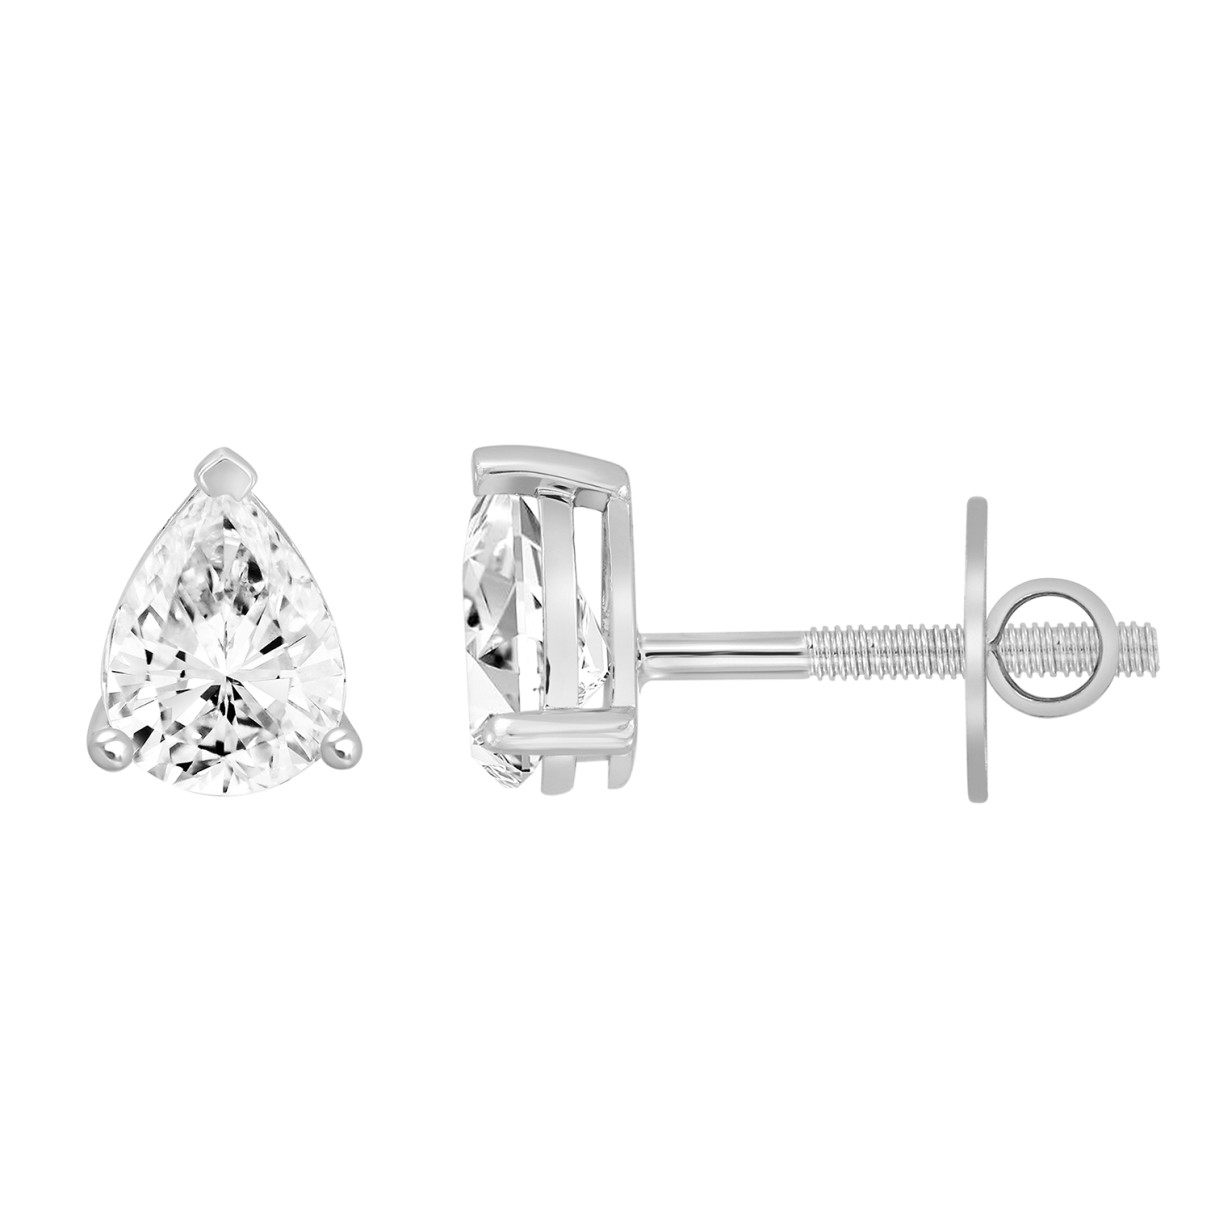 LADIES SOLITAIRE EARRINGS 1CT PEAR DIAMOND 14K WHITE GOLD